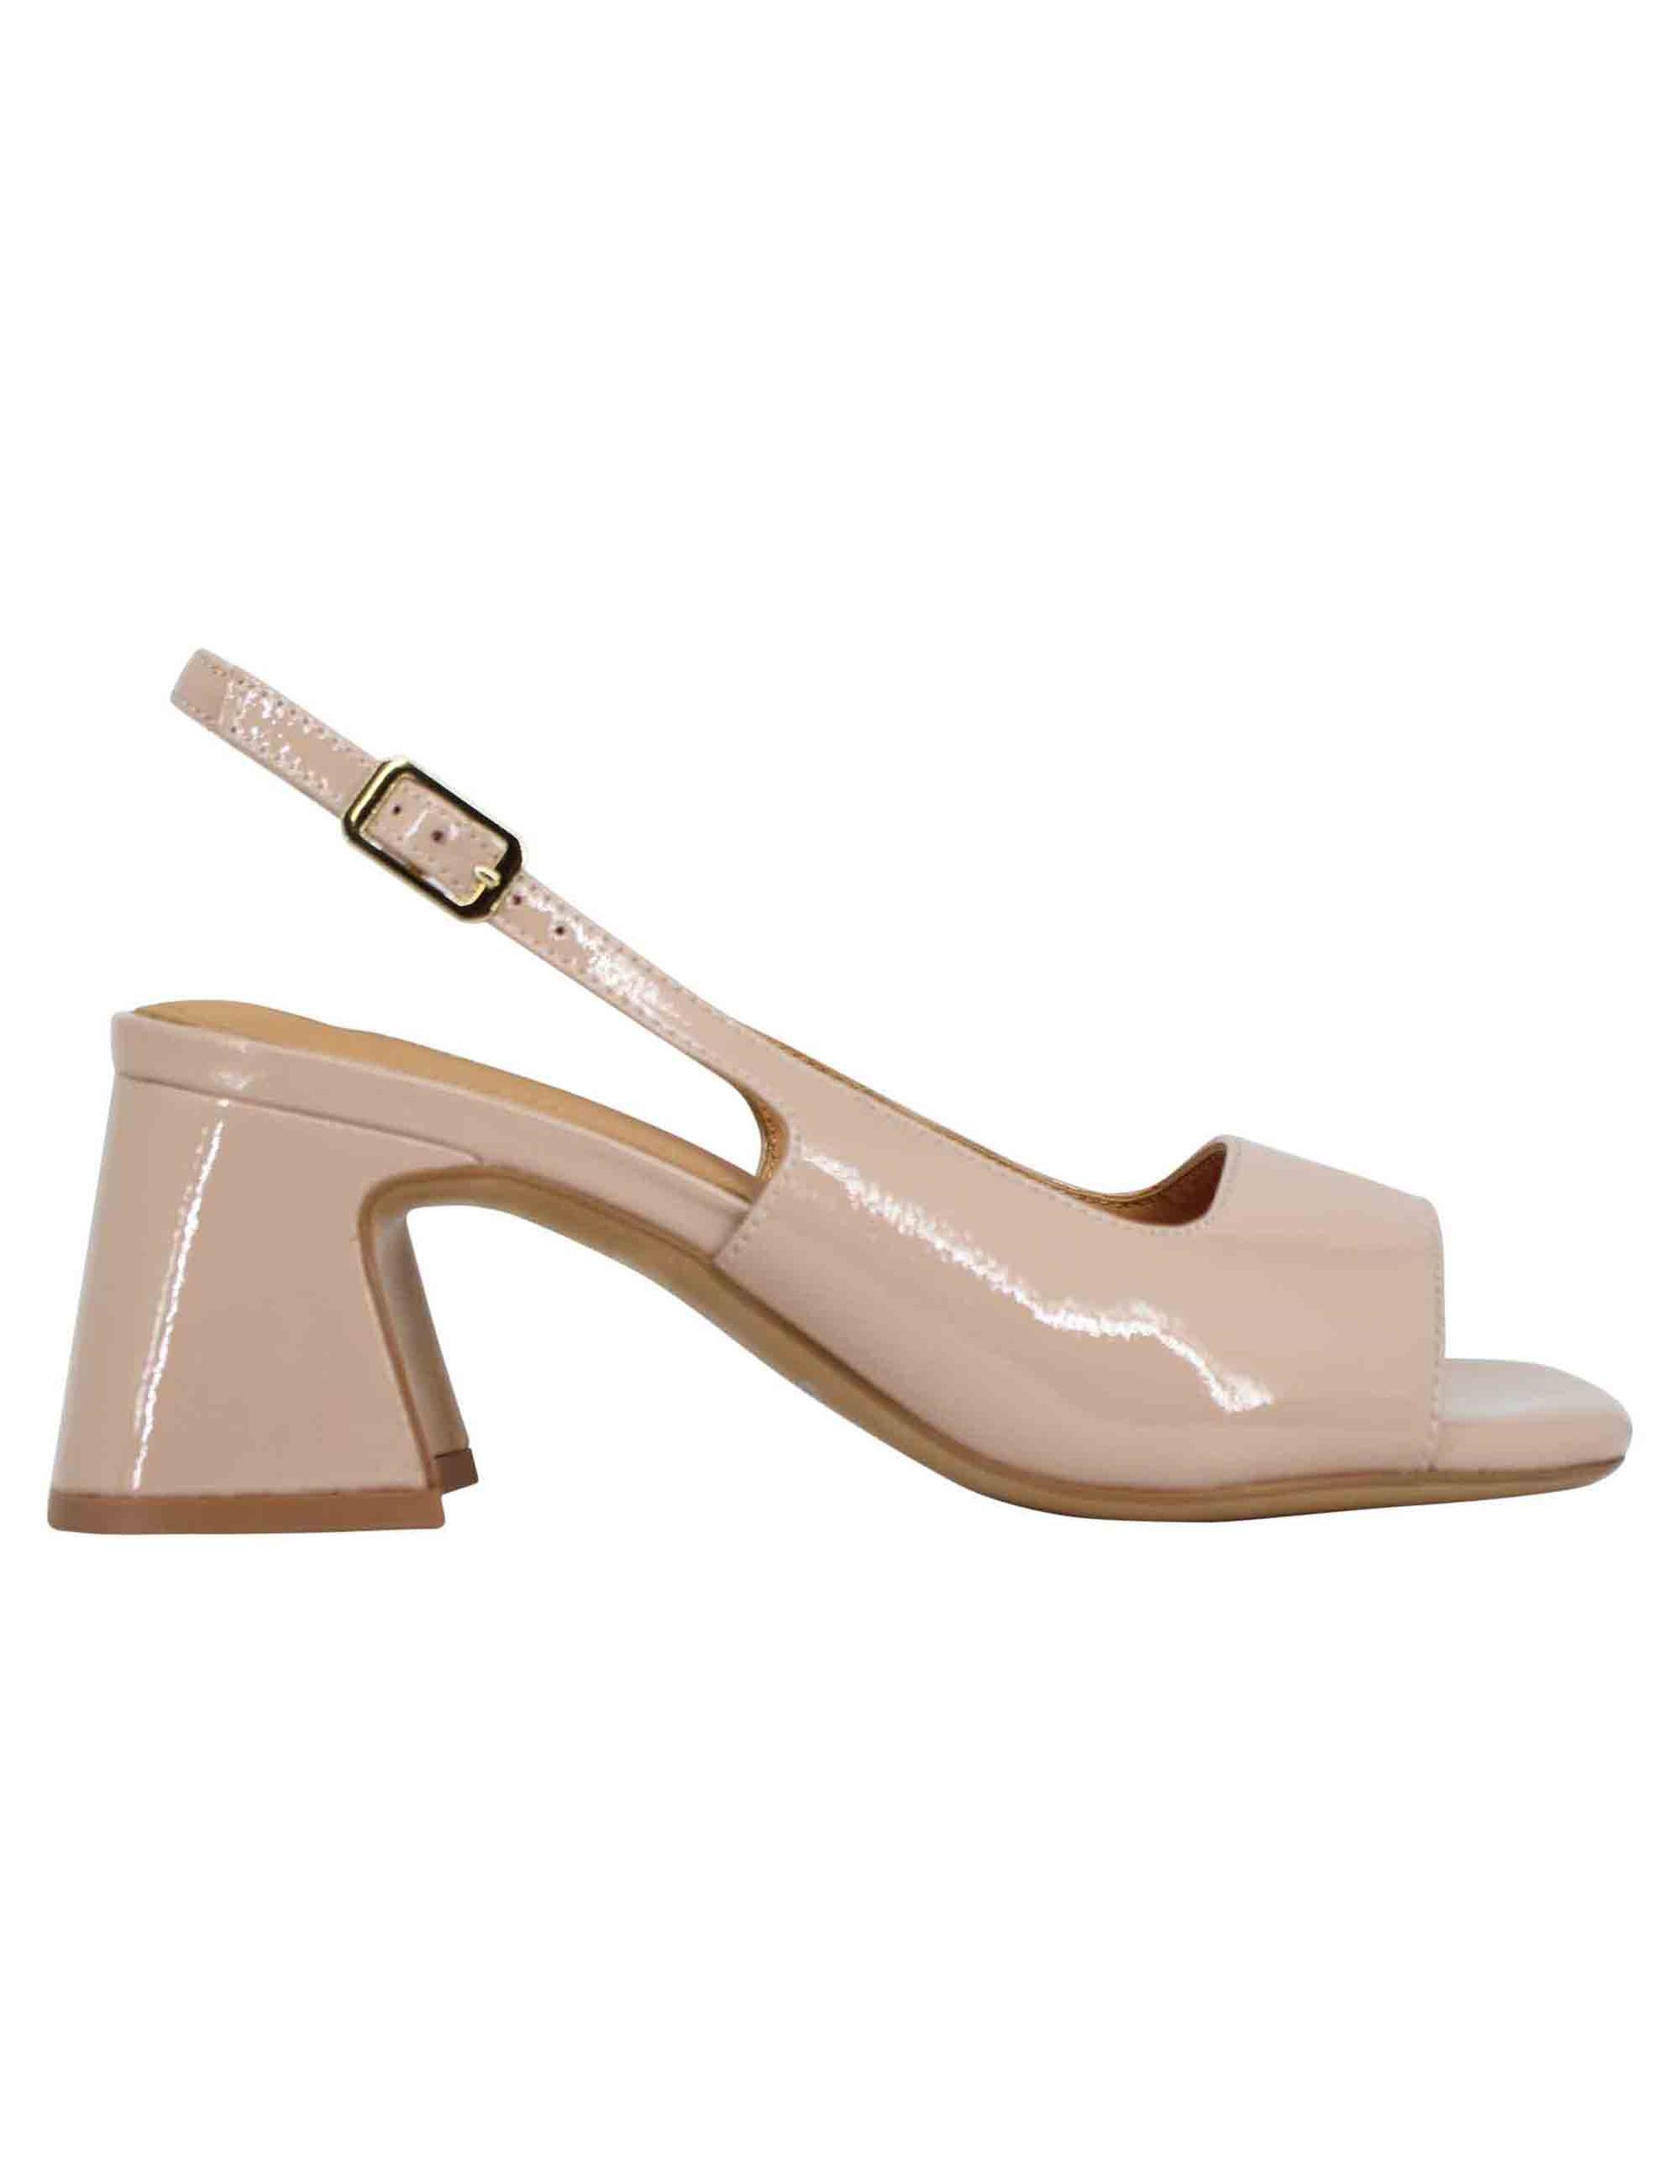 Women's slingback sandals in powder pink patent leather with square toe